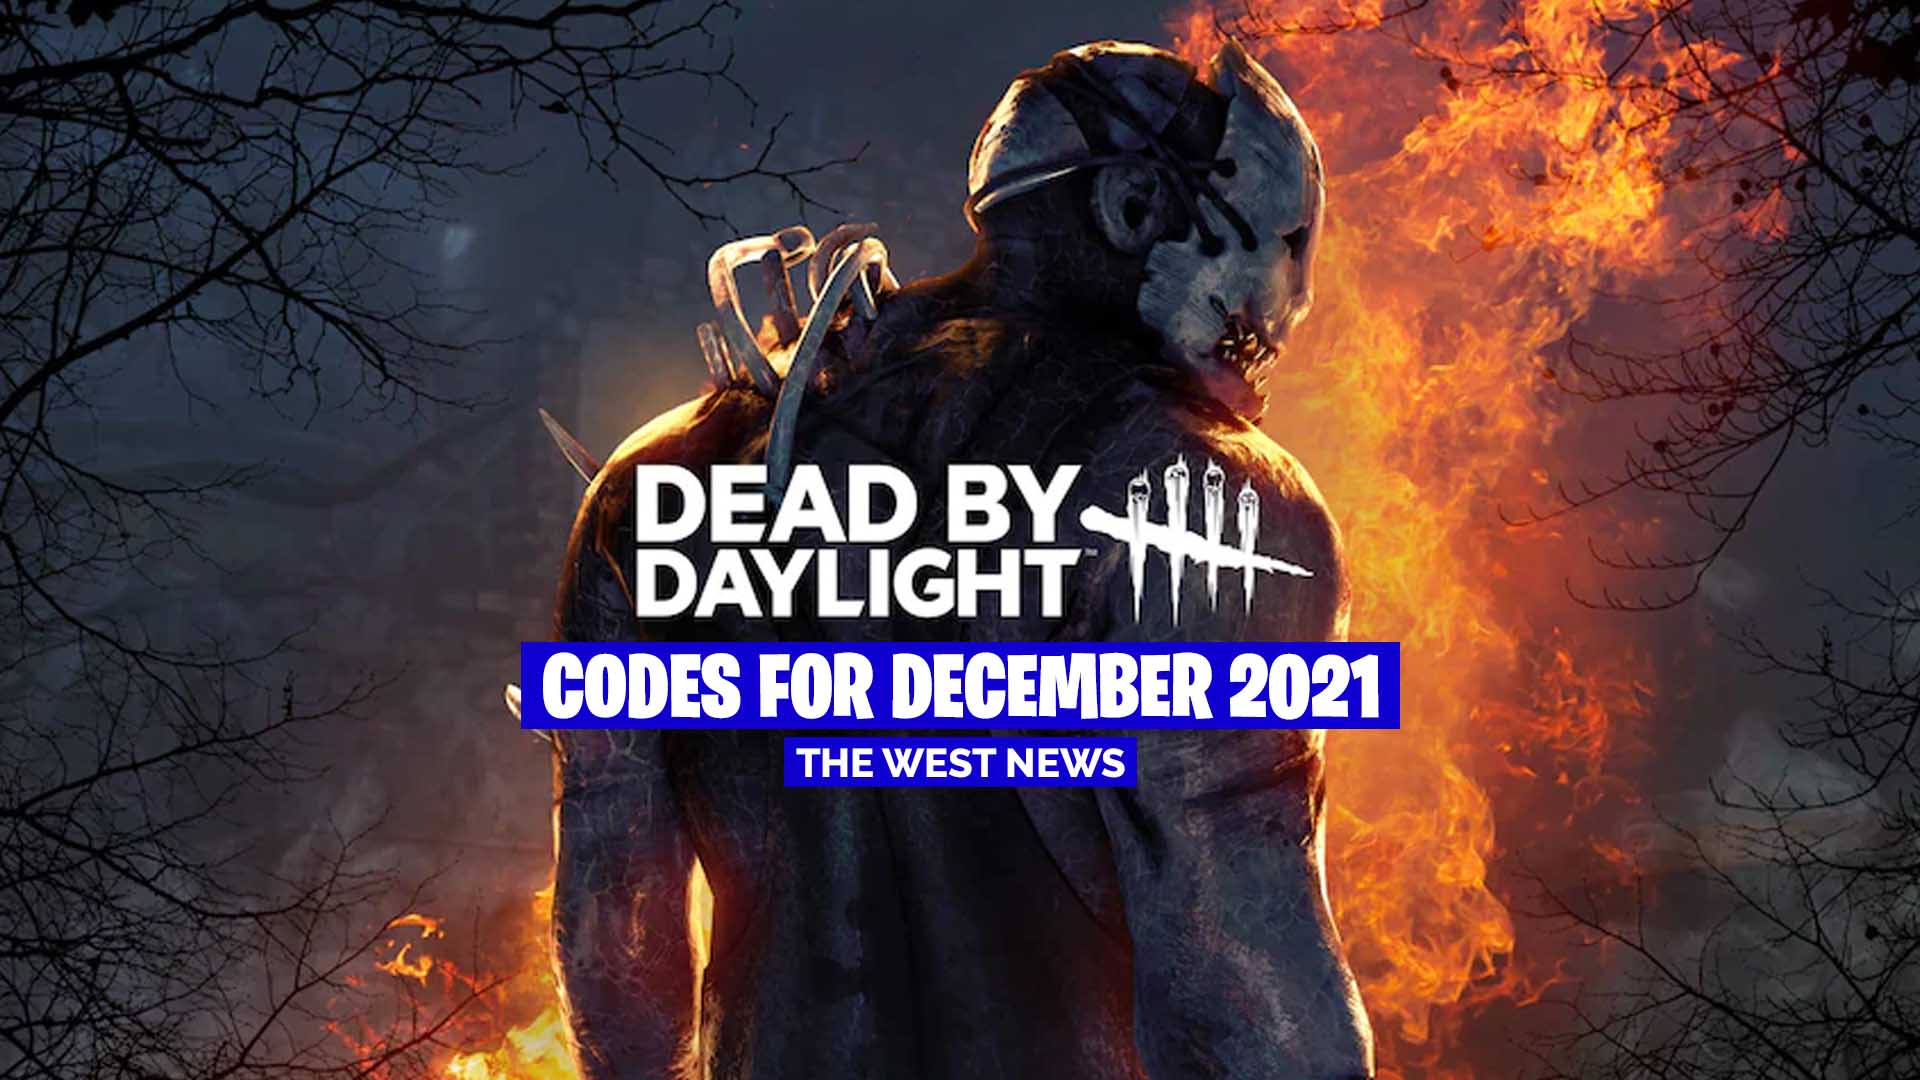 Dead by Daylight codes For December 2021